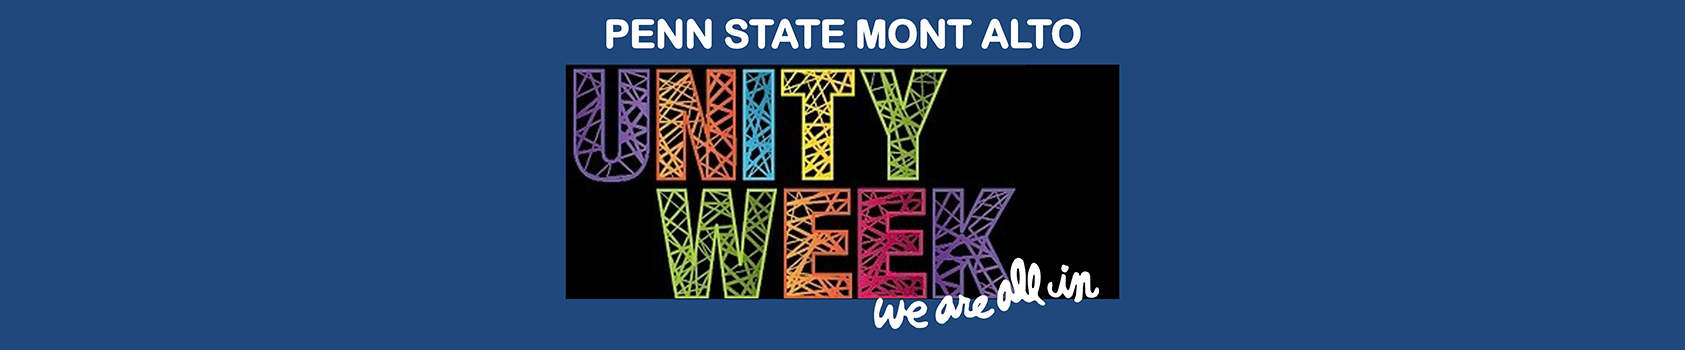 Penn State Mont Alto Unity Week - We're All In